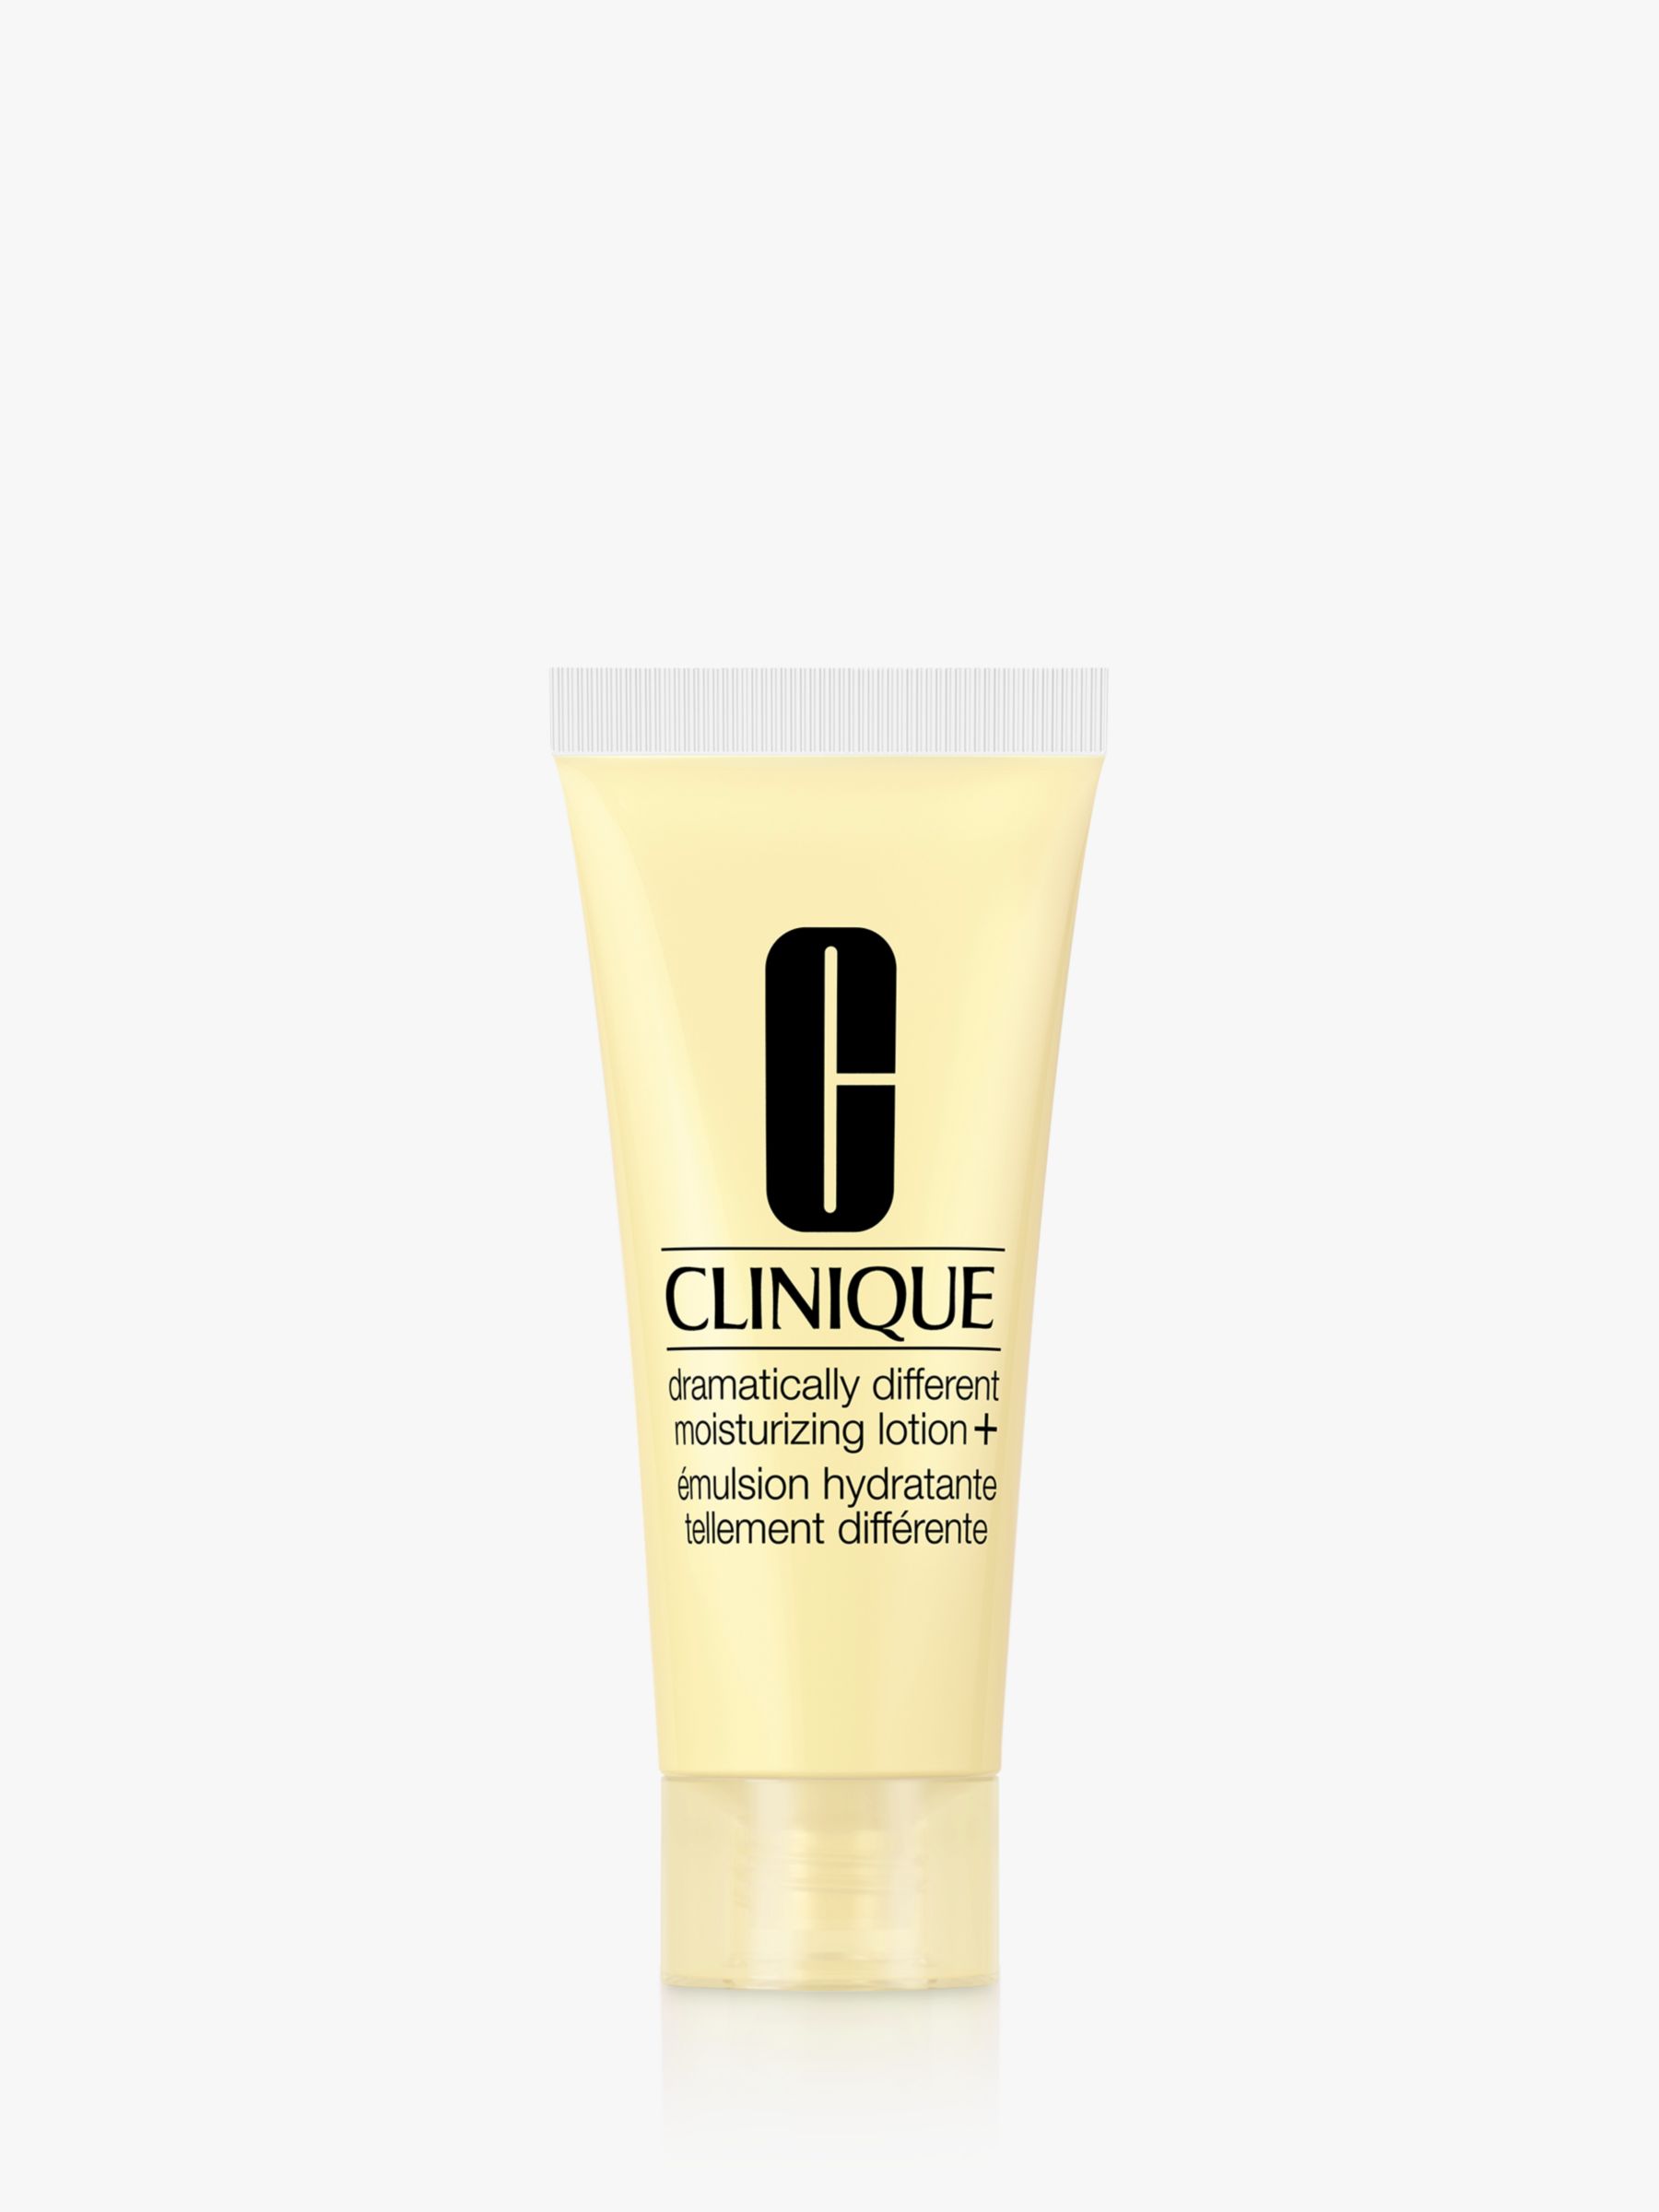 Clinique Dramatically Different Moisturising Lotion+, 15ml